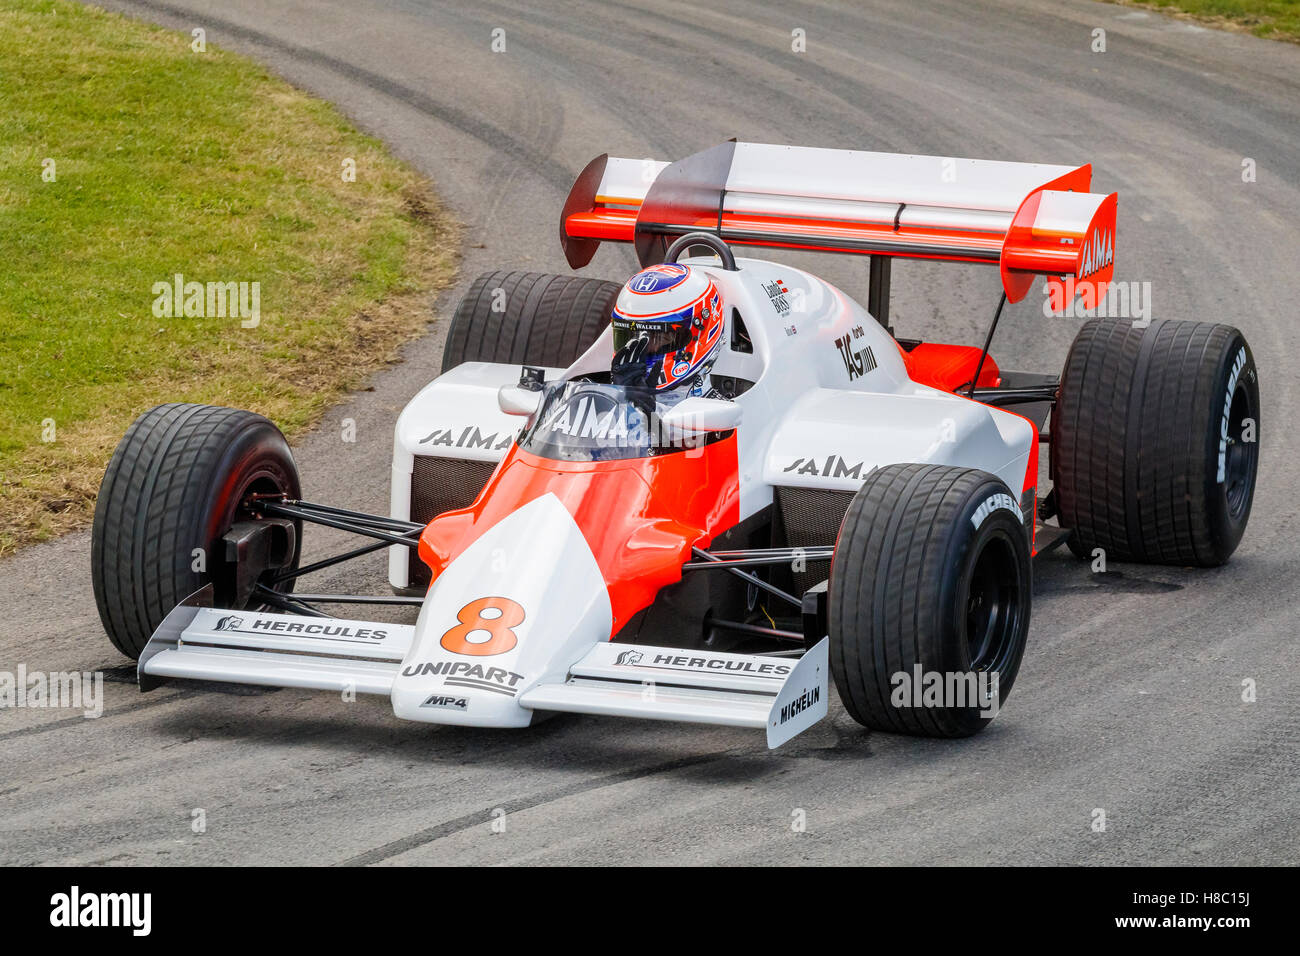 Mclaren Mp4 2 High Resolution Stock Photography And Images Alamy